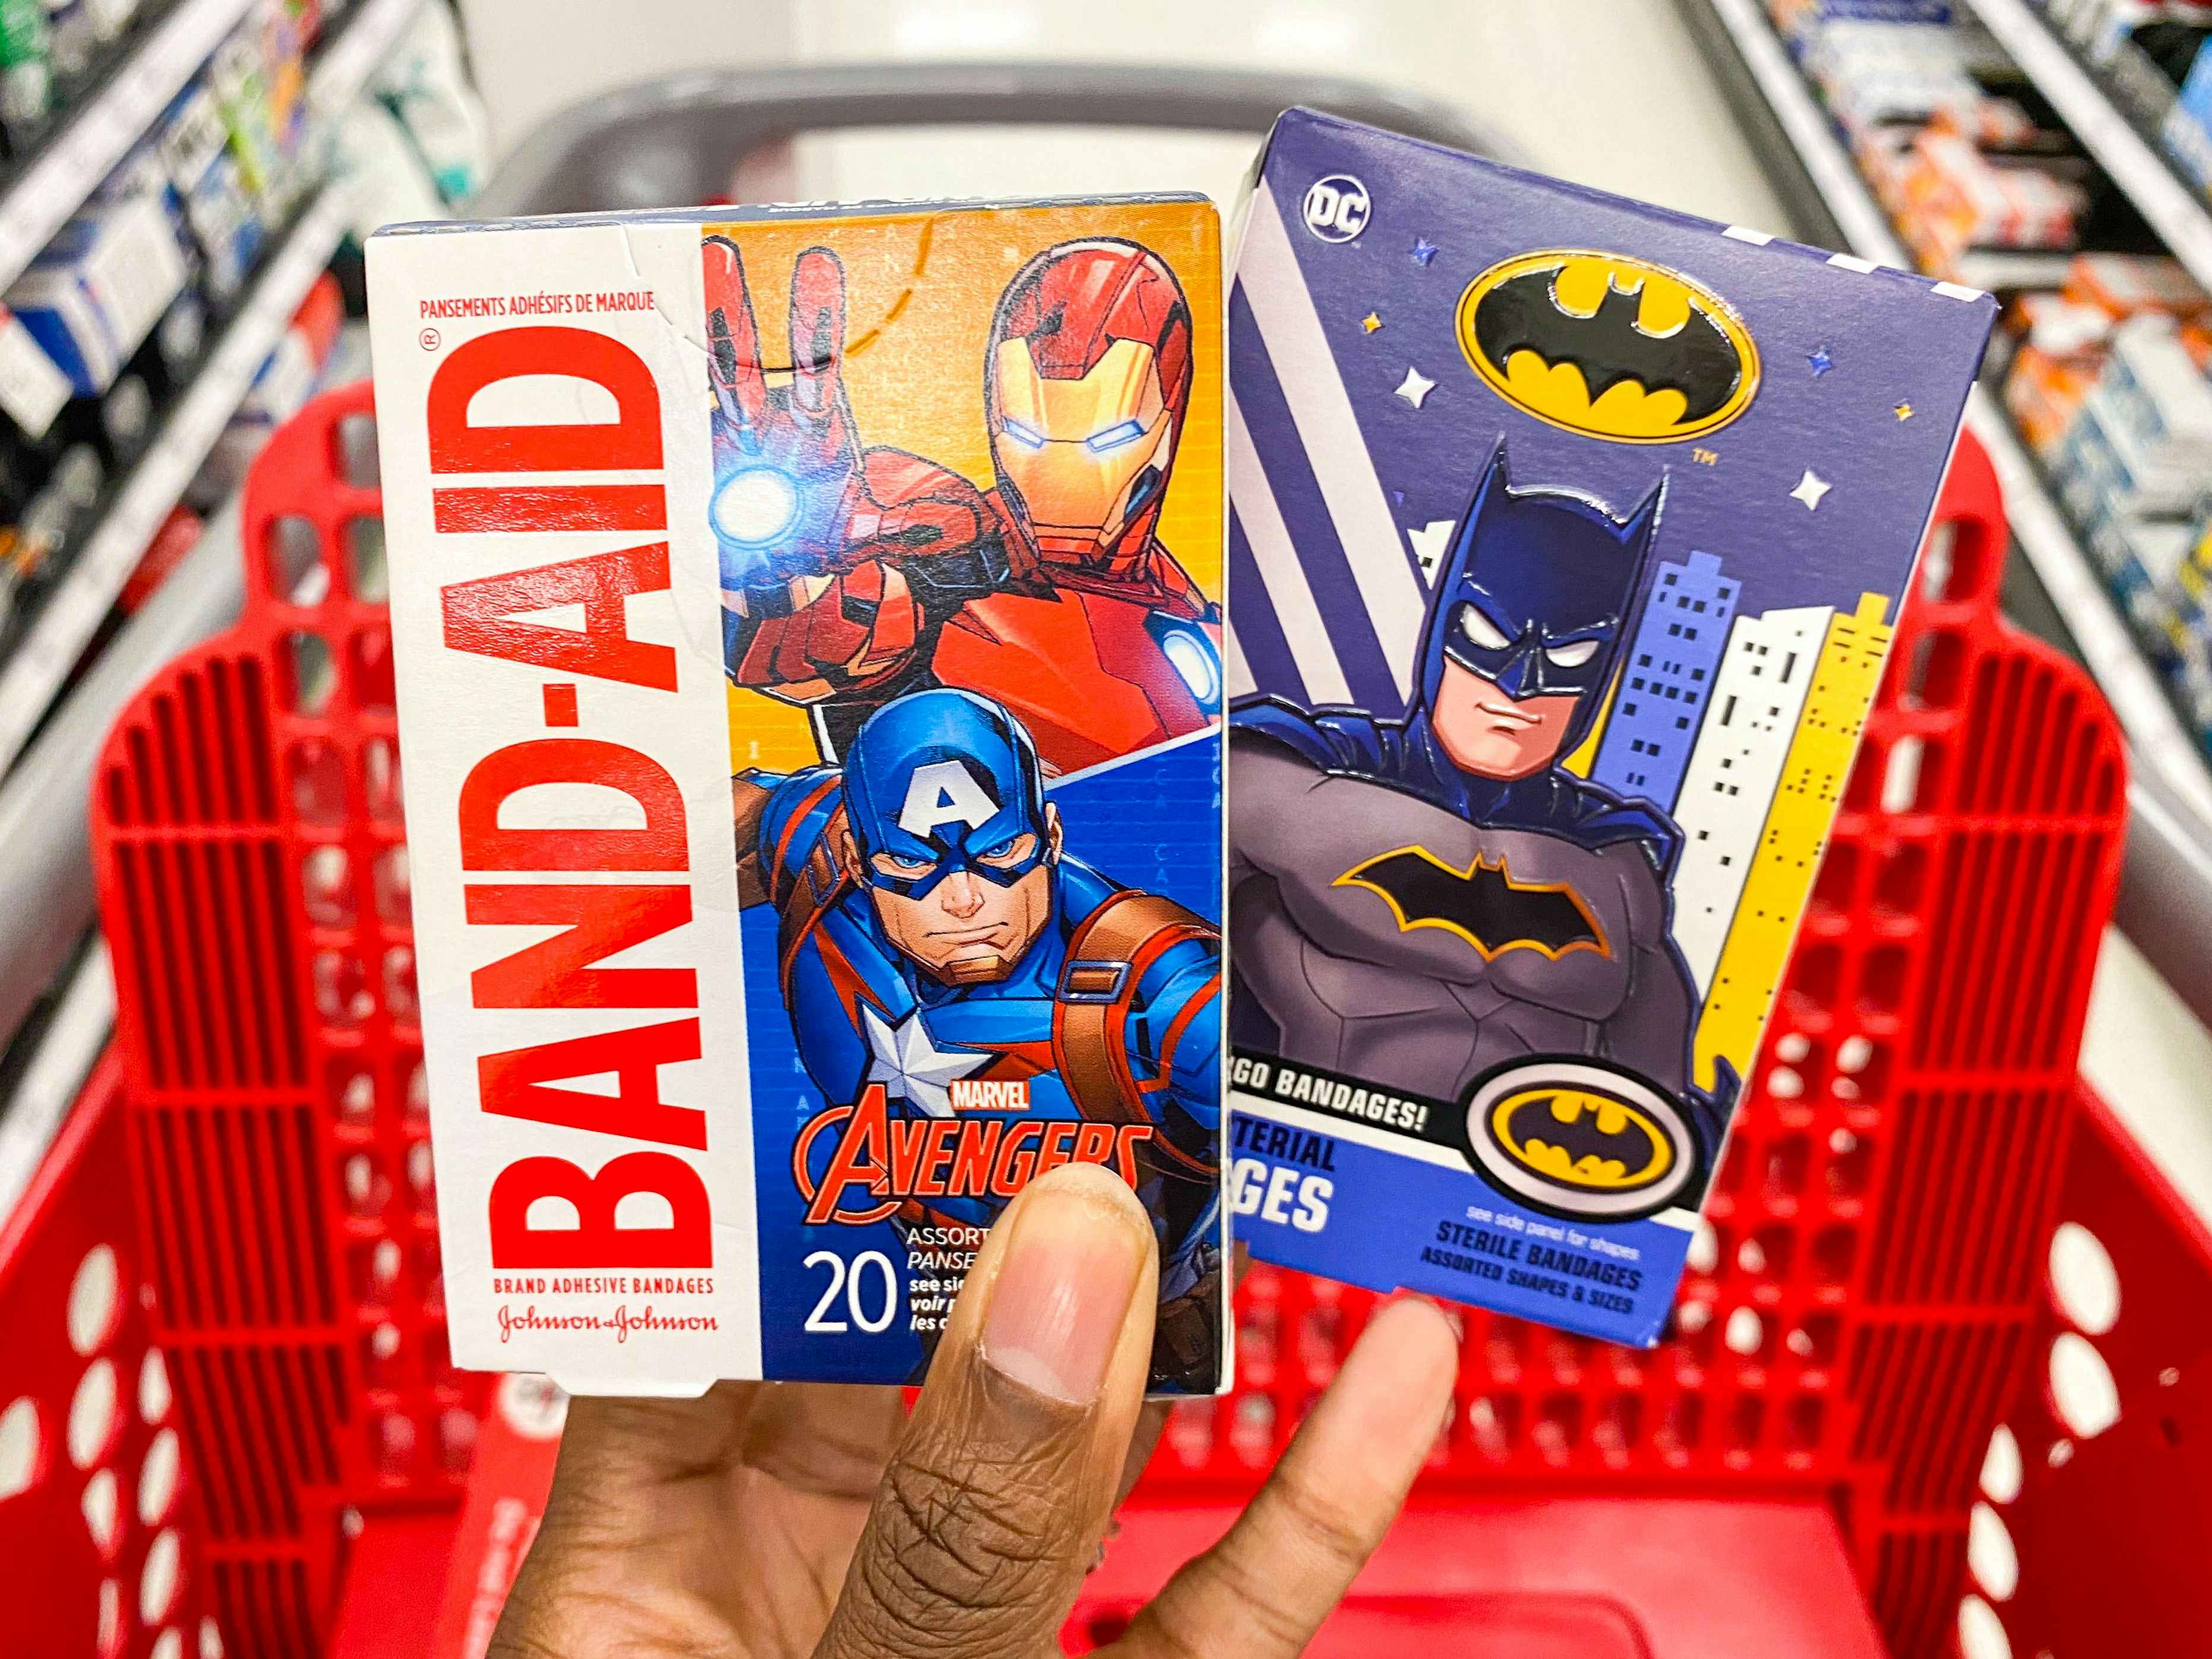 A person's hand holding two boxes of superhero Band-Aids in front of a Target shopping cart.